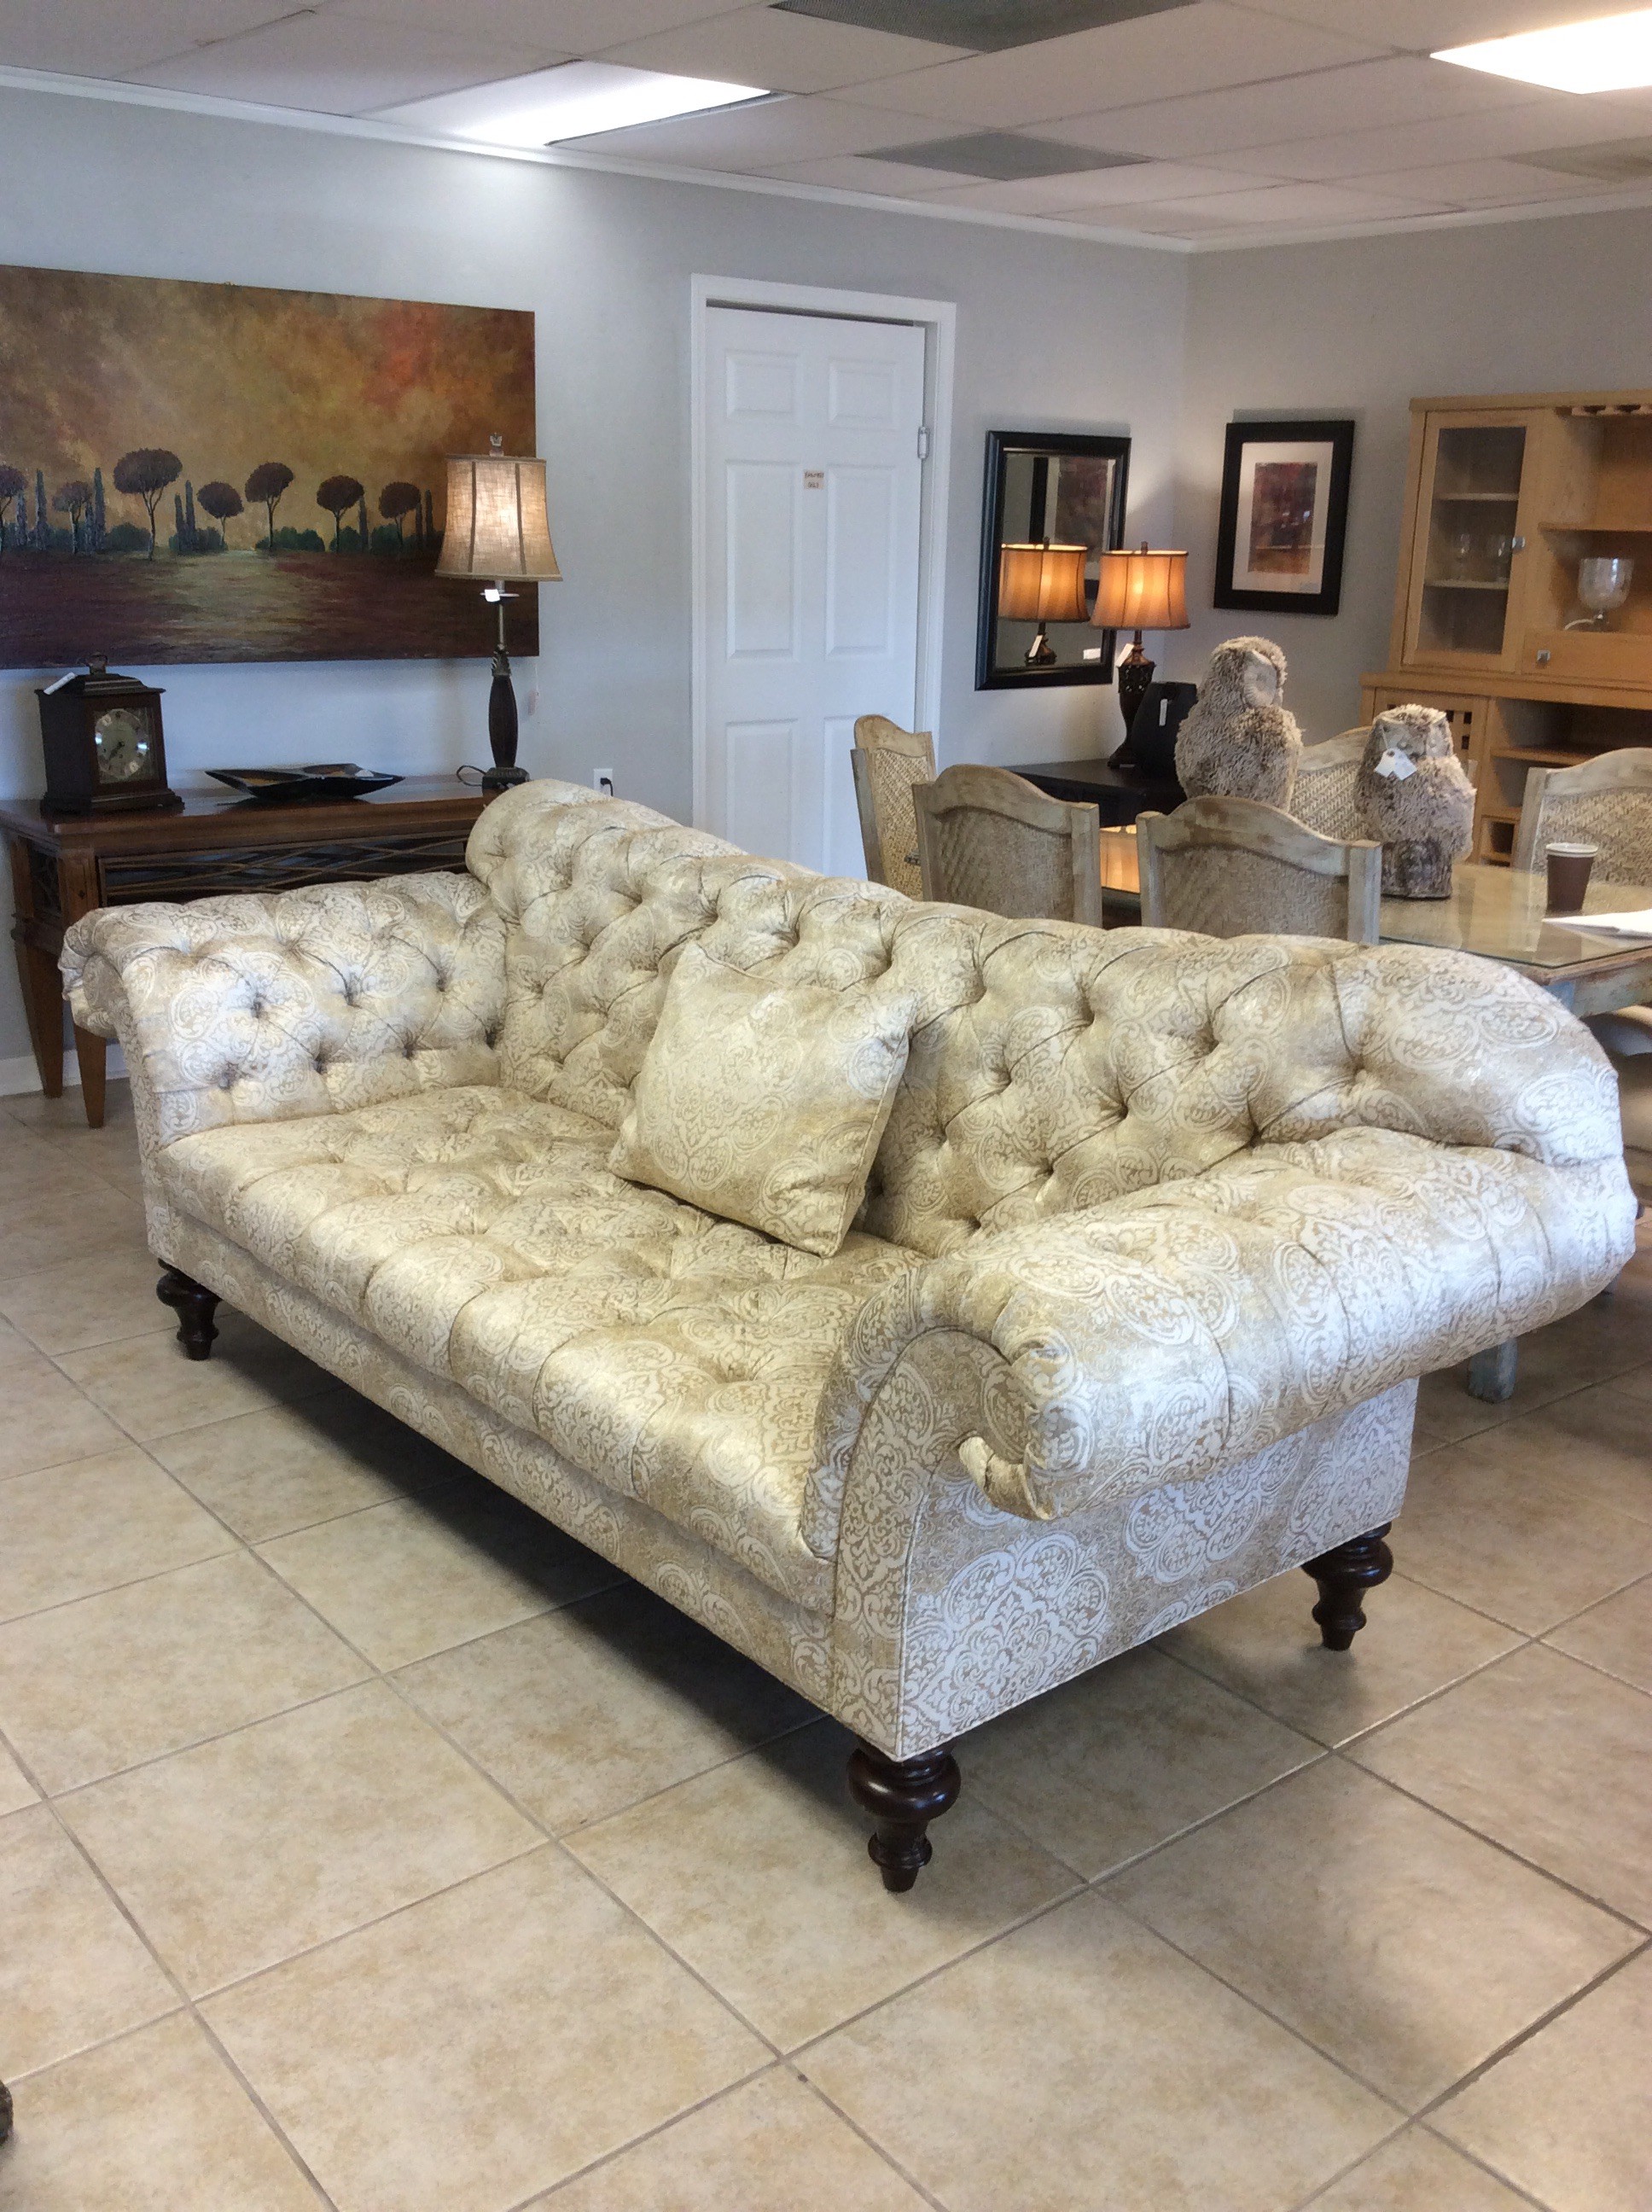 Upholstered in gold and cream, this formal sofa by Sherrill includes rolled arms, button-tufting and 3 accessory pillows.